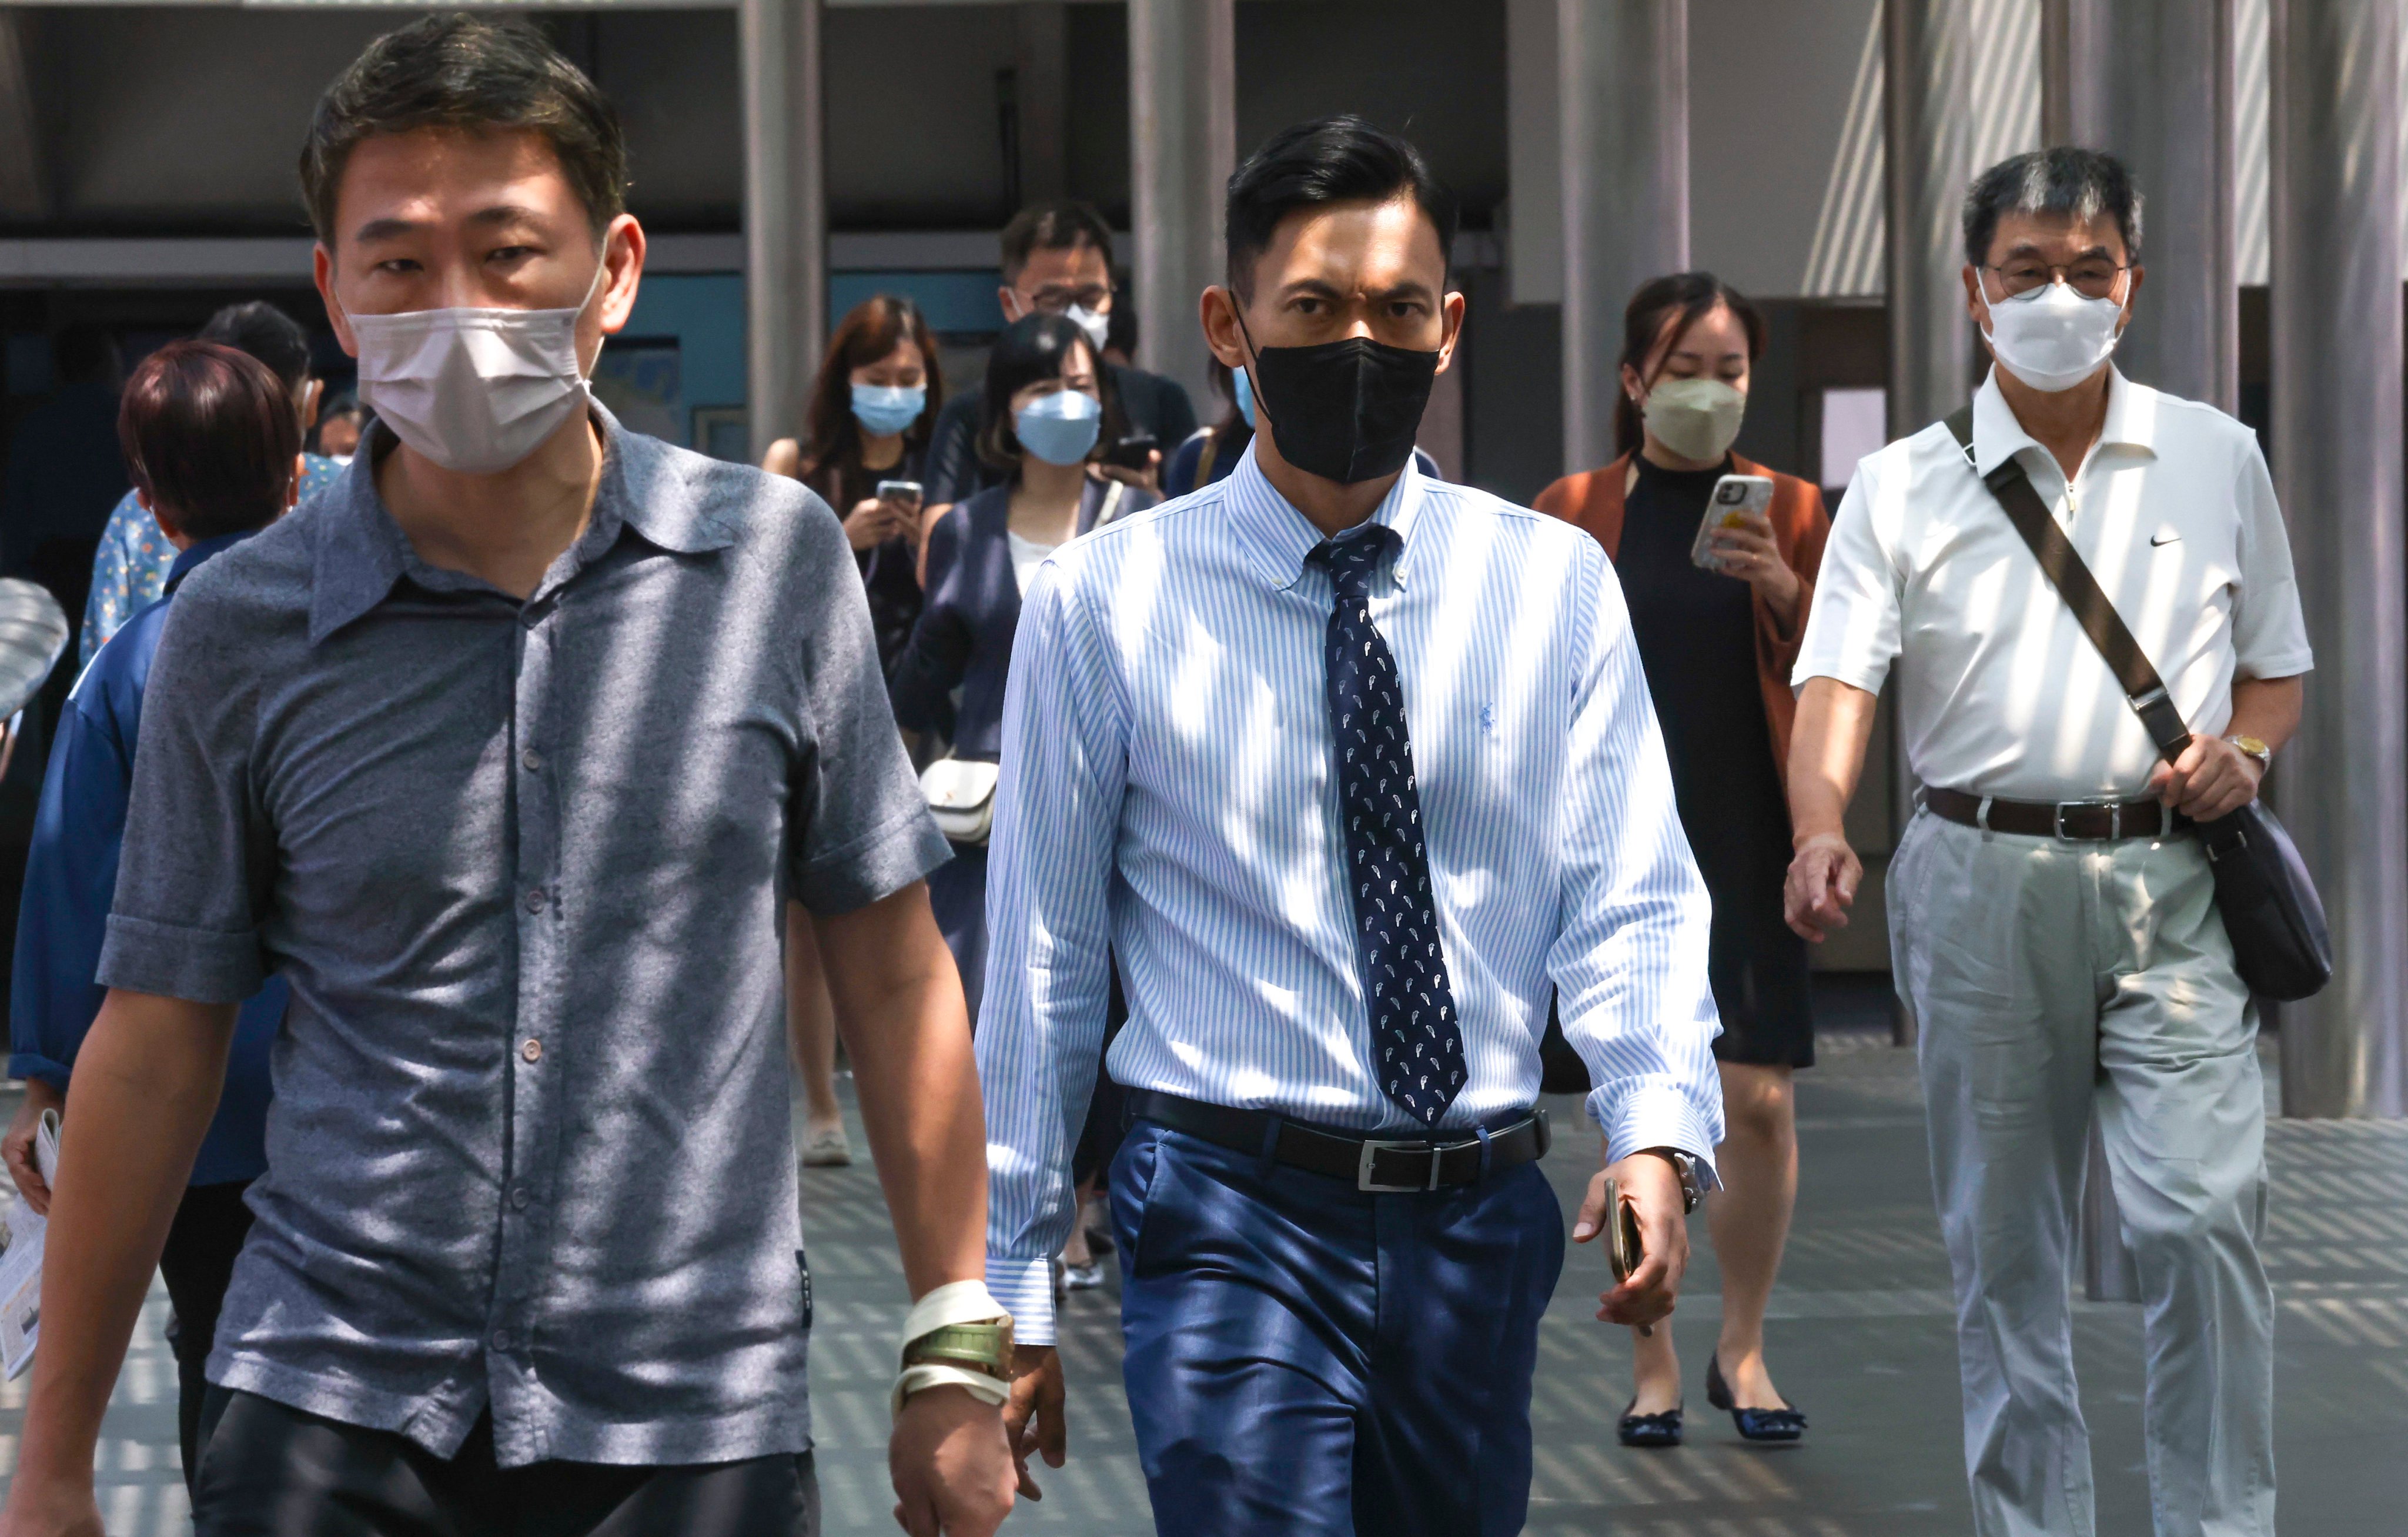 Masked pedestrians in Hong Kong’s Central. The city has one of the world’s toughest pandemic systems and has only recently eased curbs extensively. Photo: Jonathan Wong